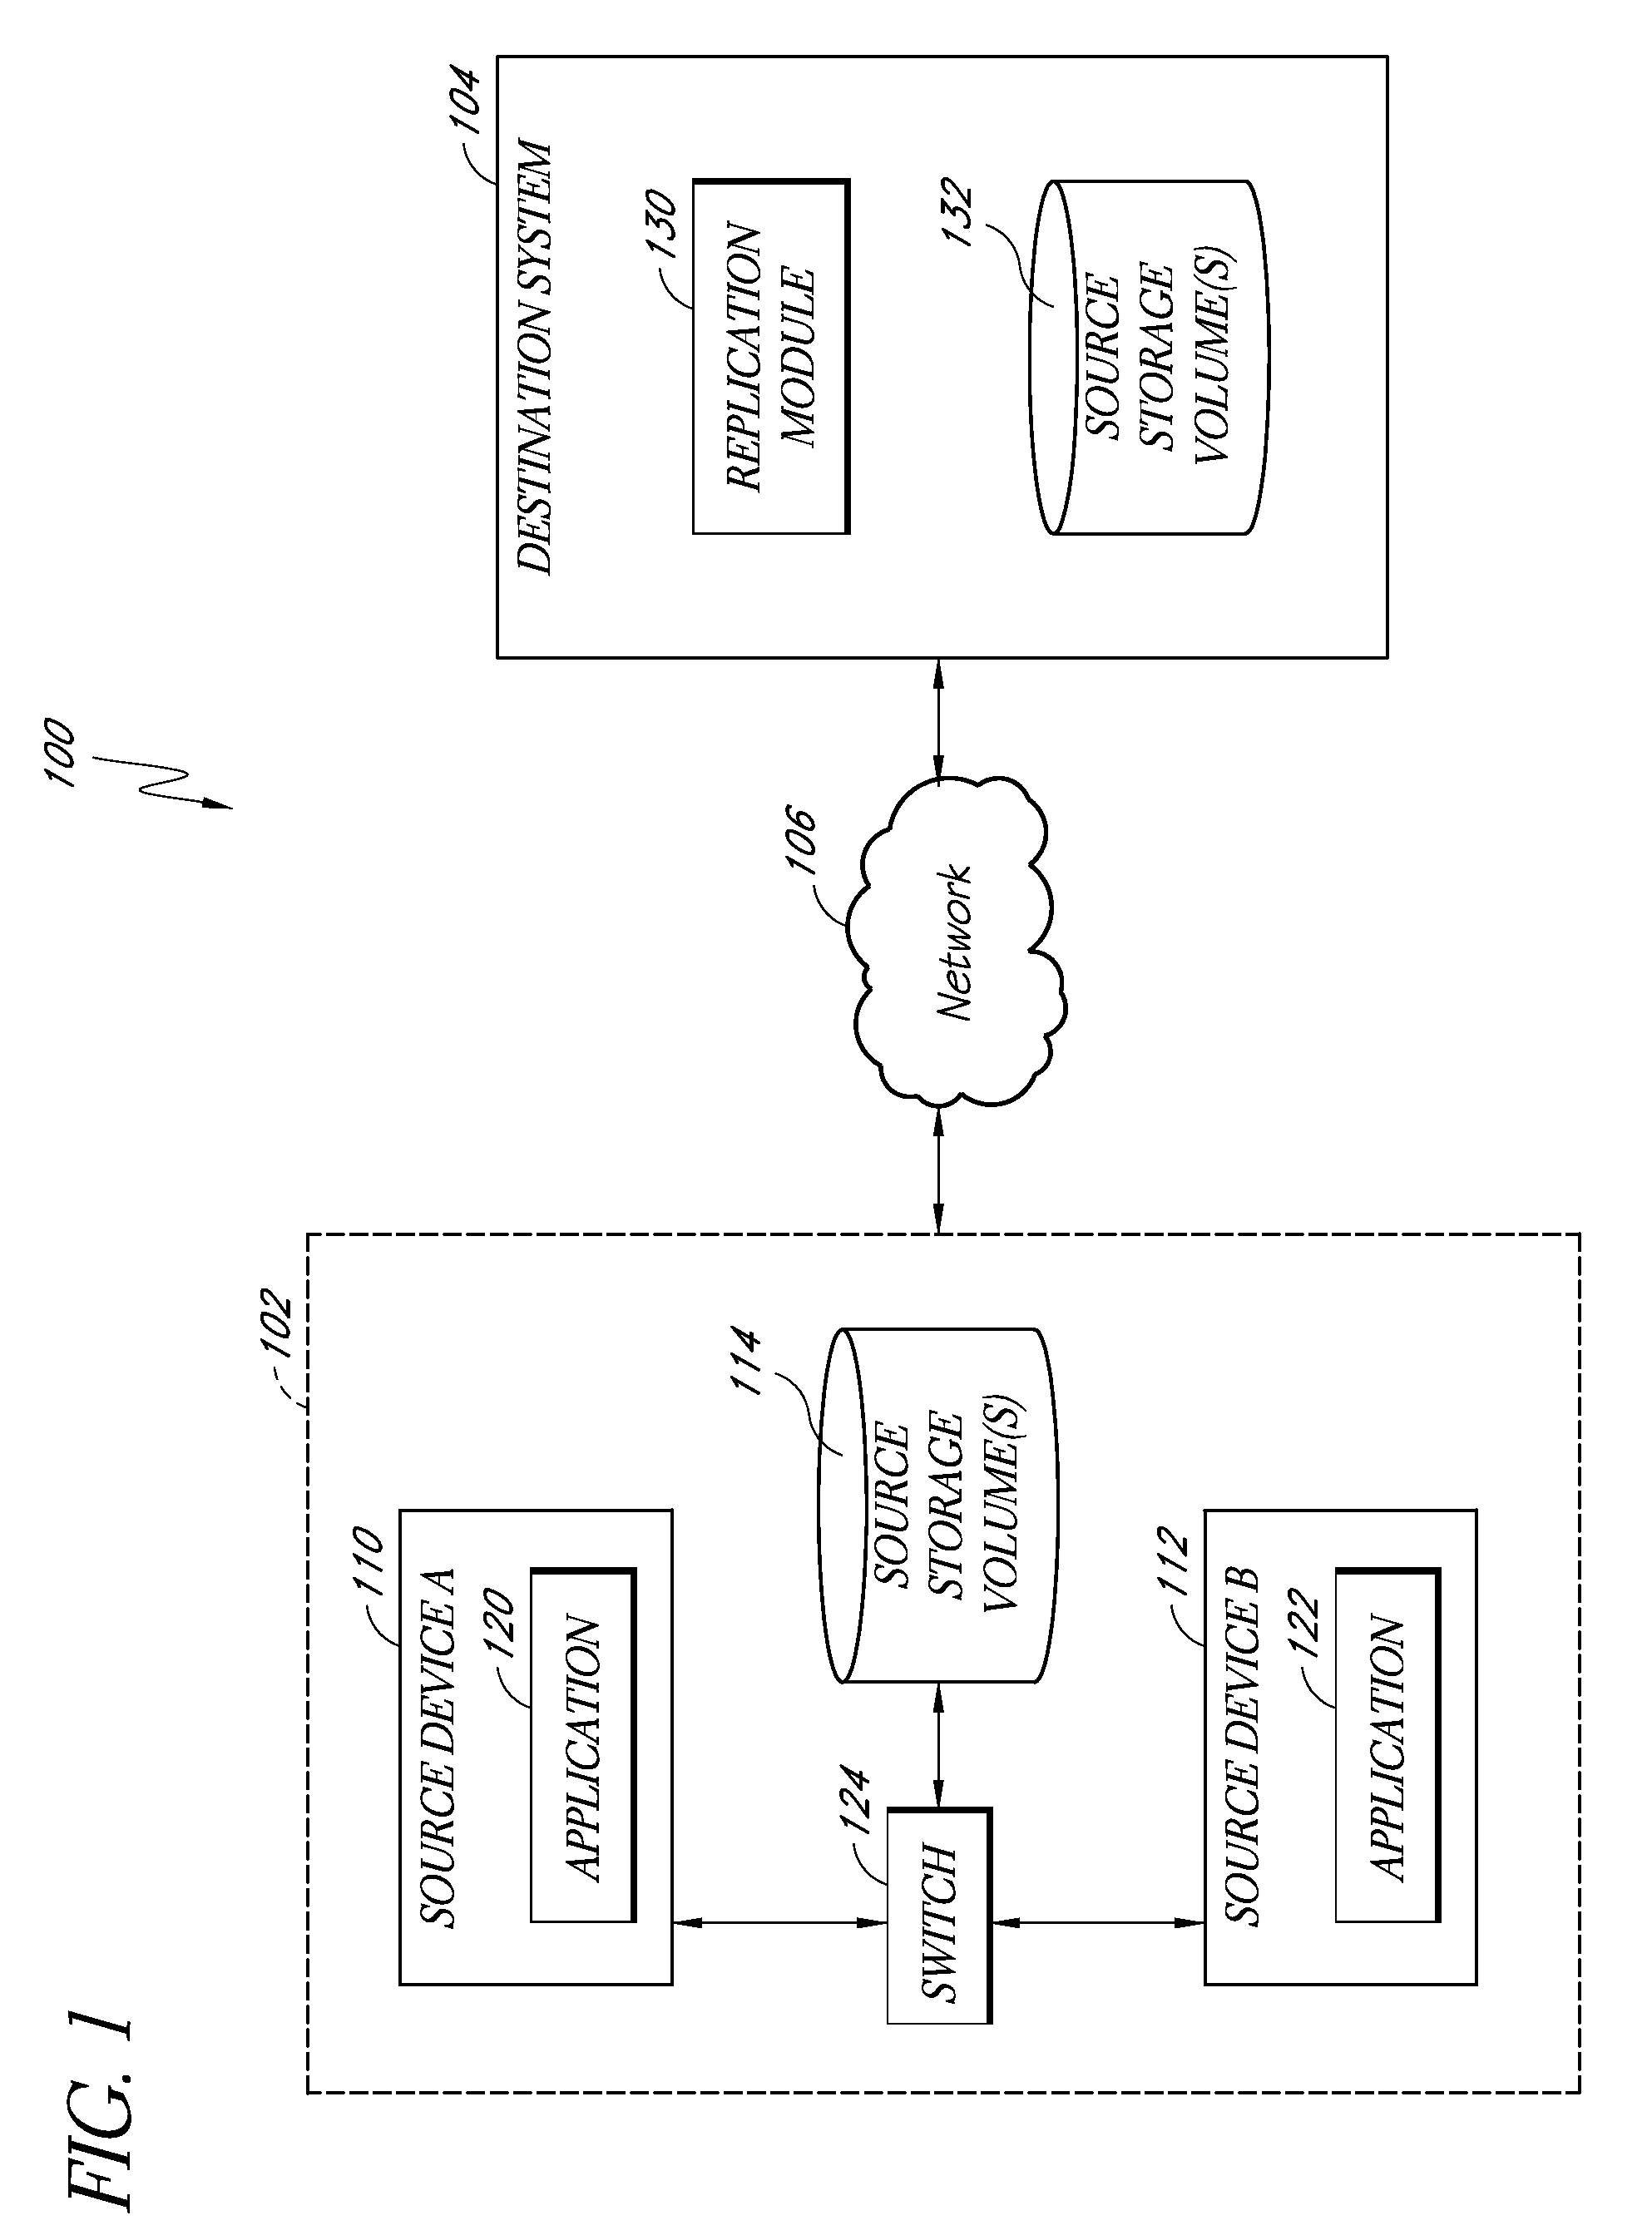 Systems and methods for performing discrete data replication